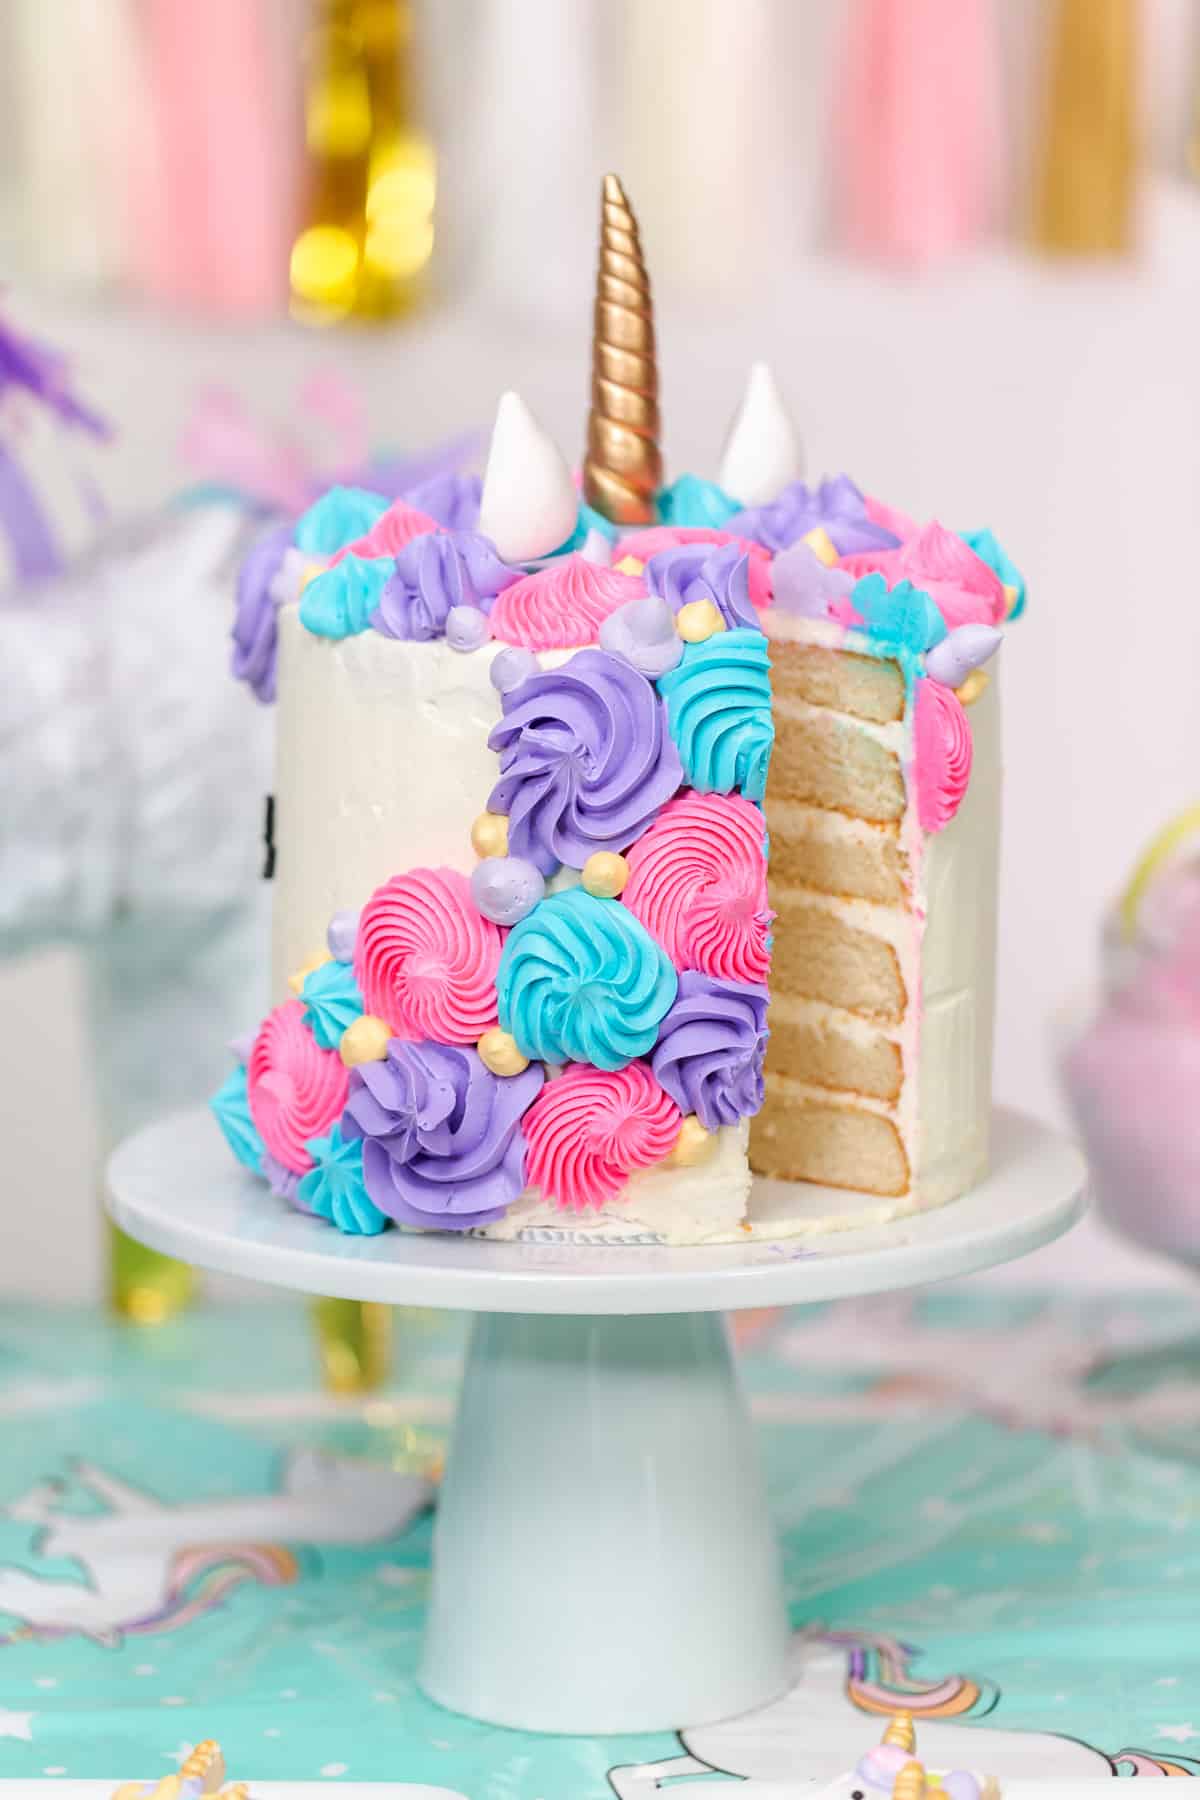 A unicorn layer cake on a cake stand, with a slice missing